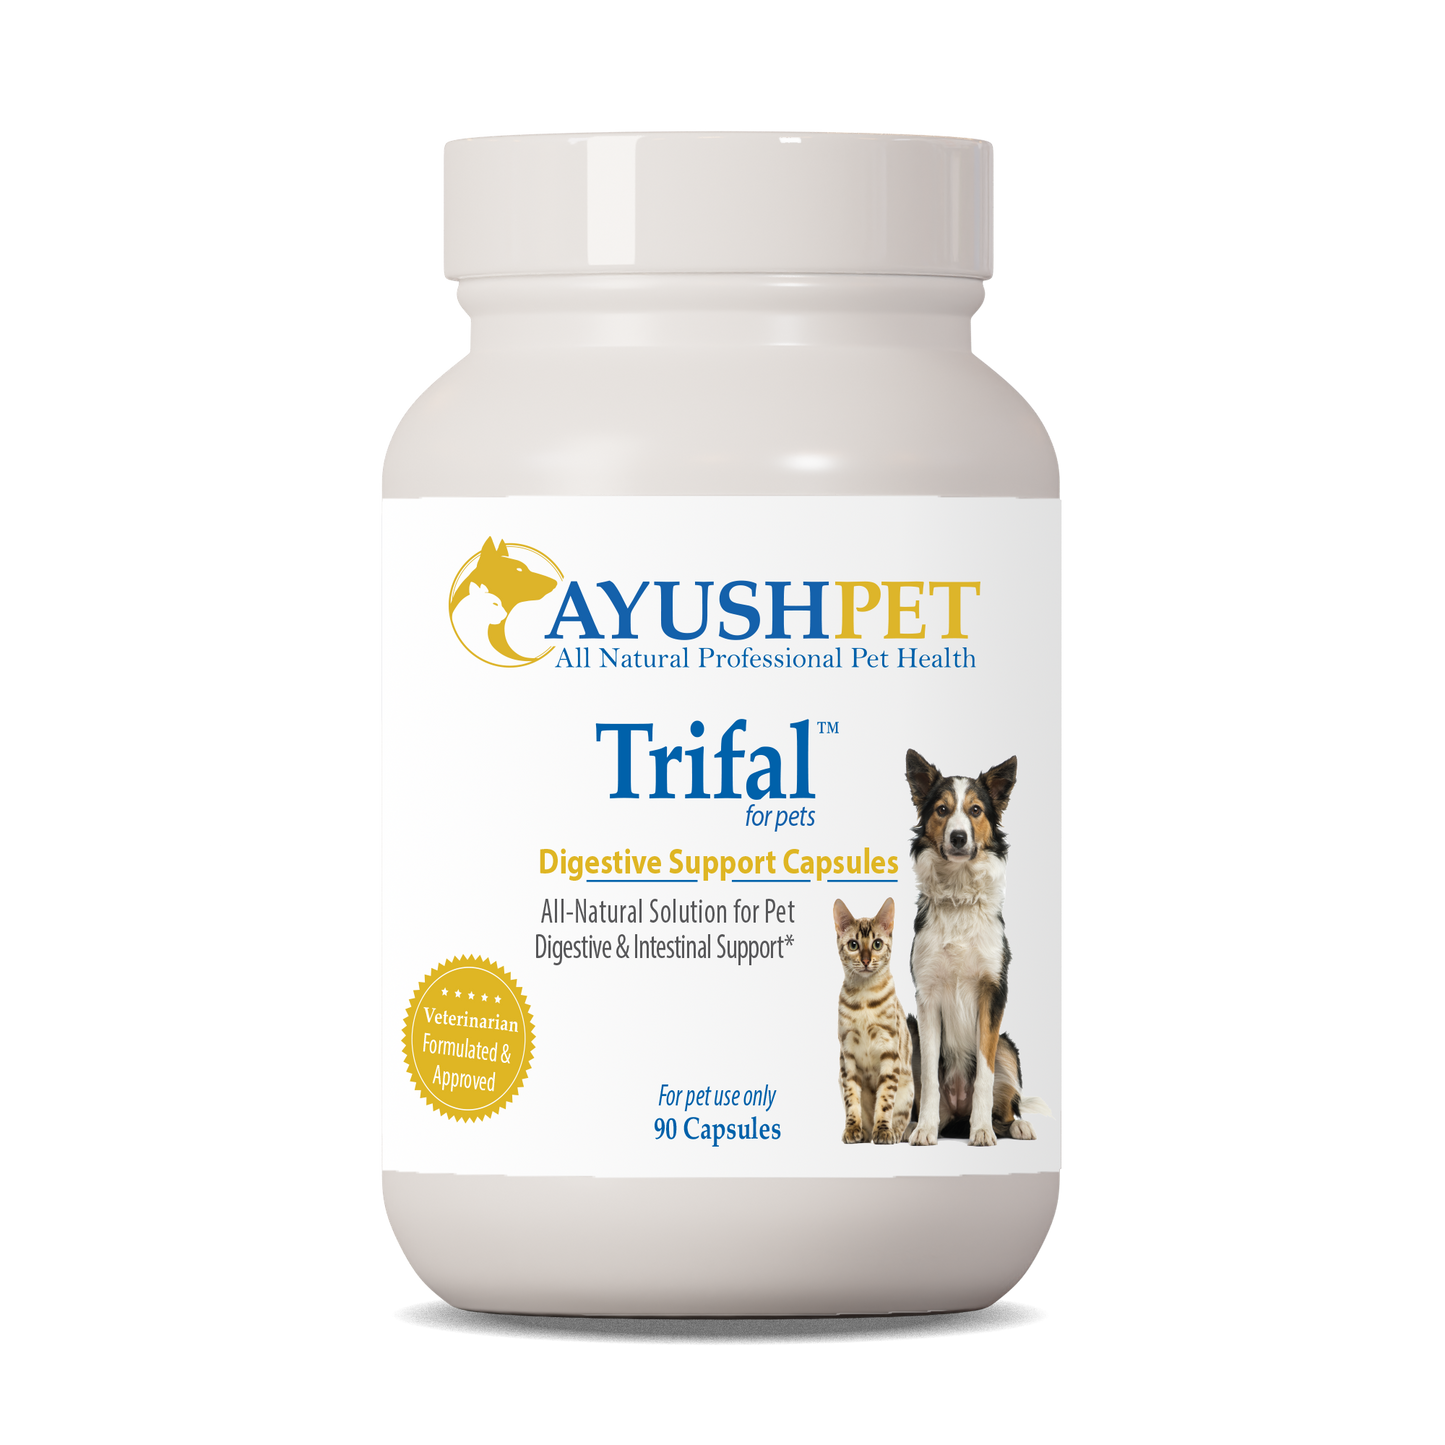 pet trifal capsules provides digestive and elimination support and is also considered to have antioxidant properties which promotes healthy vision by ruved herbal supplements and ayush herbs